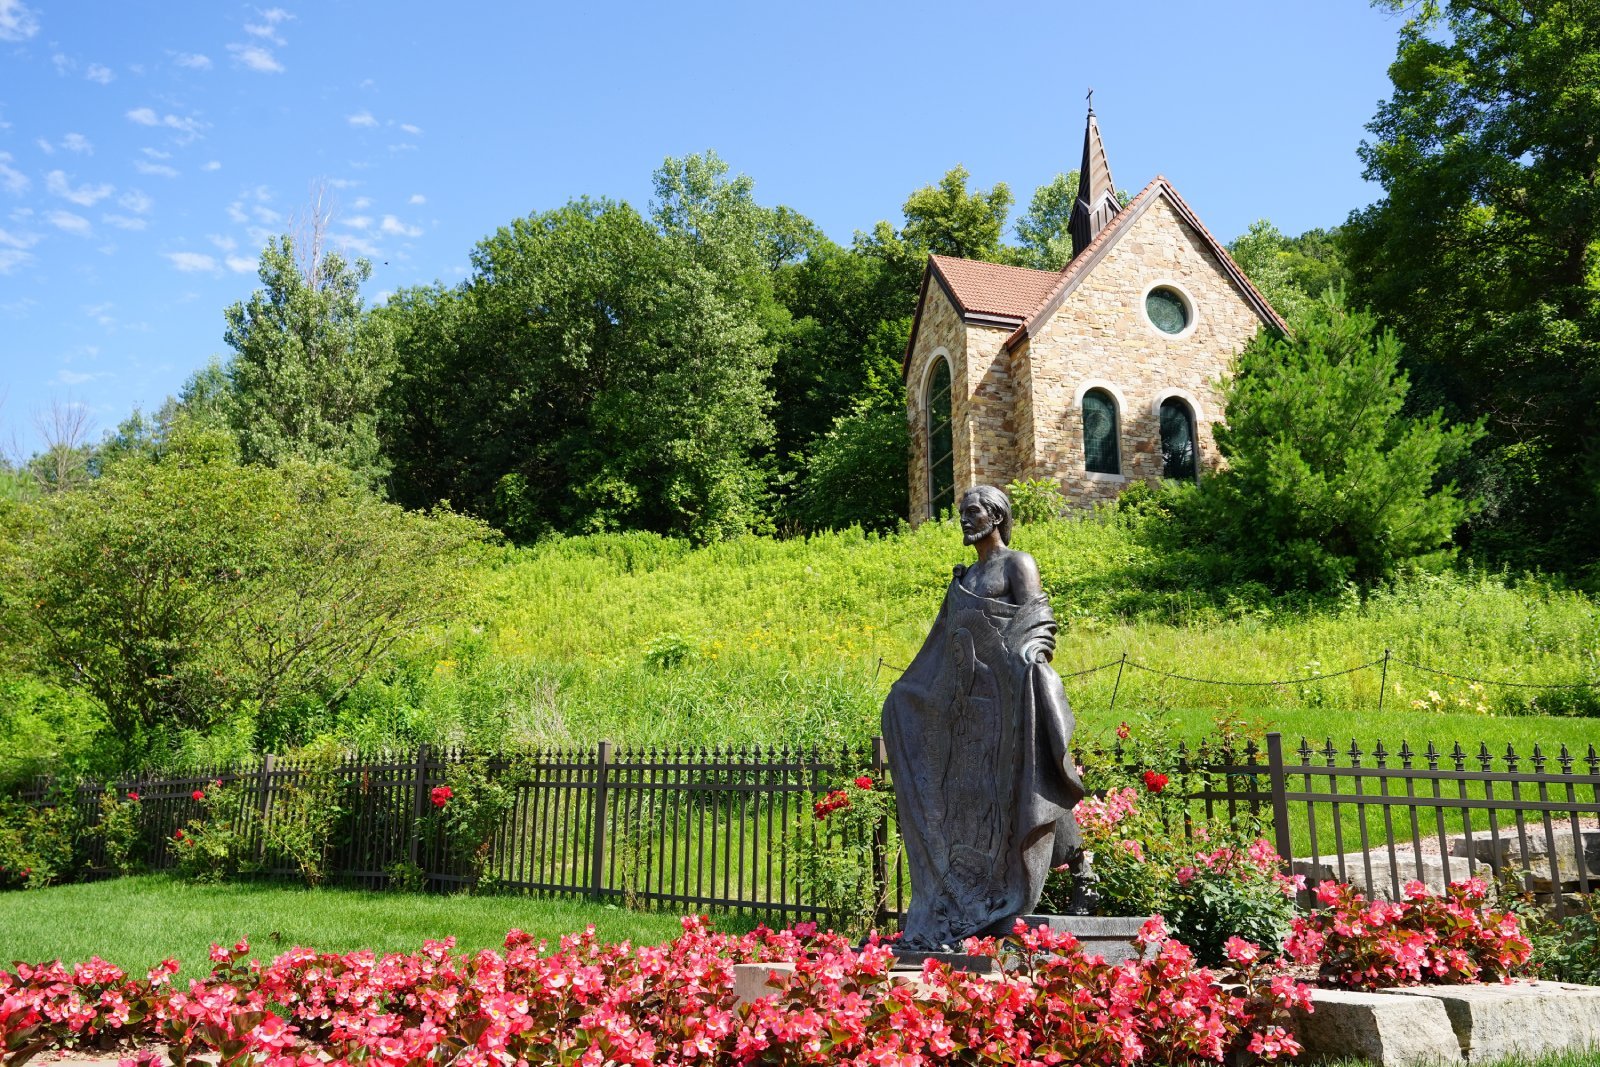 Image Credit: Shutterstock / Aaron of L.A. Photography <p><span>In La Crosse, this shrine is a place of pilgrimage for devotees of Our Lady of Guadalupe, offering a peaceful and spiritual experience in its beautiful grounds and chapel.</span></p>